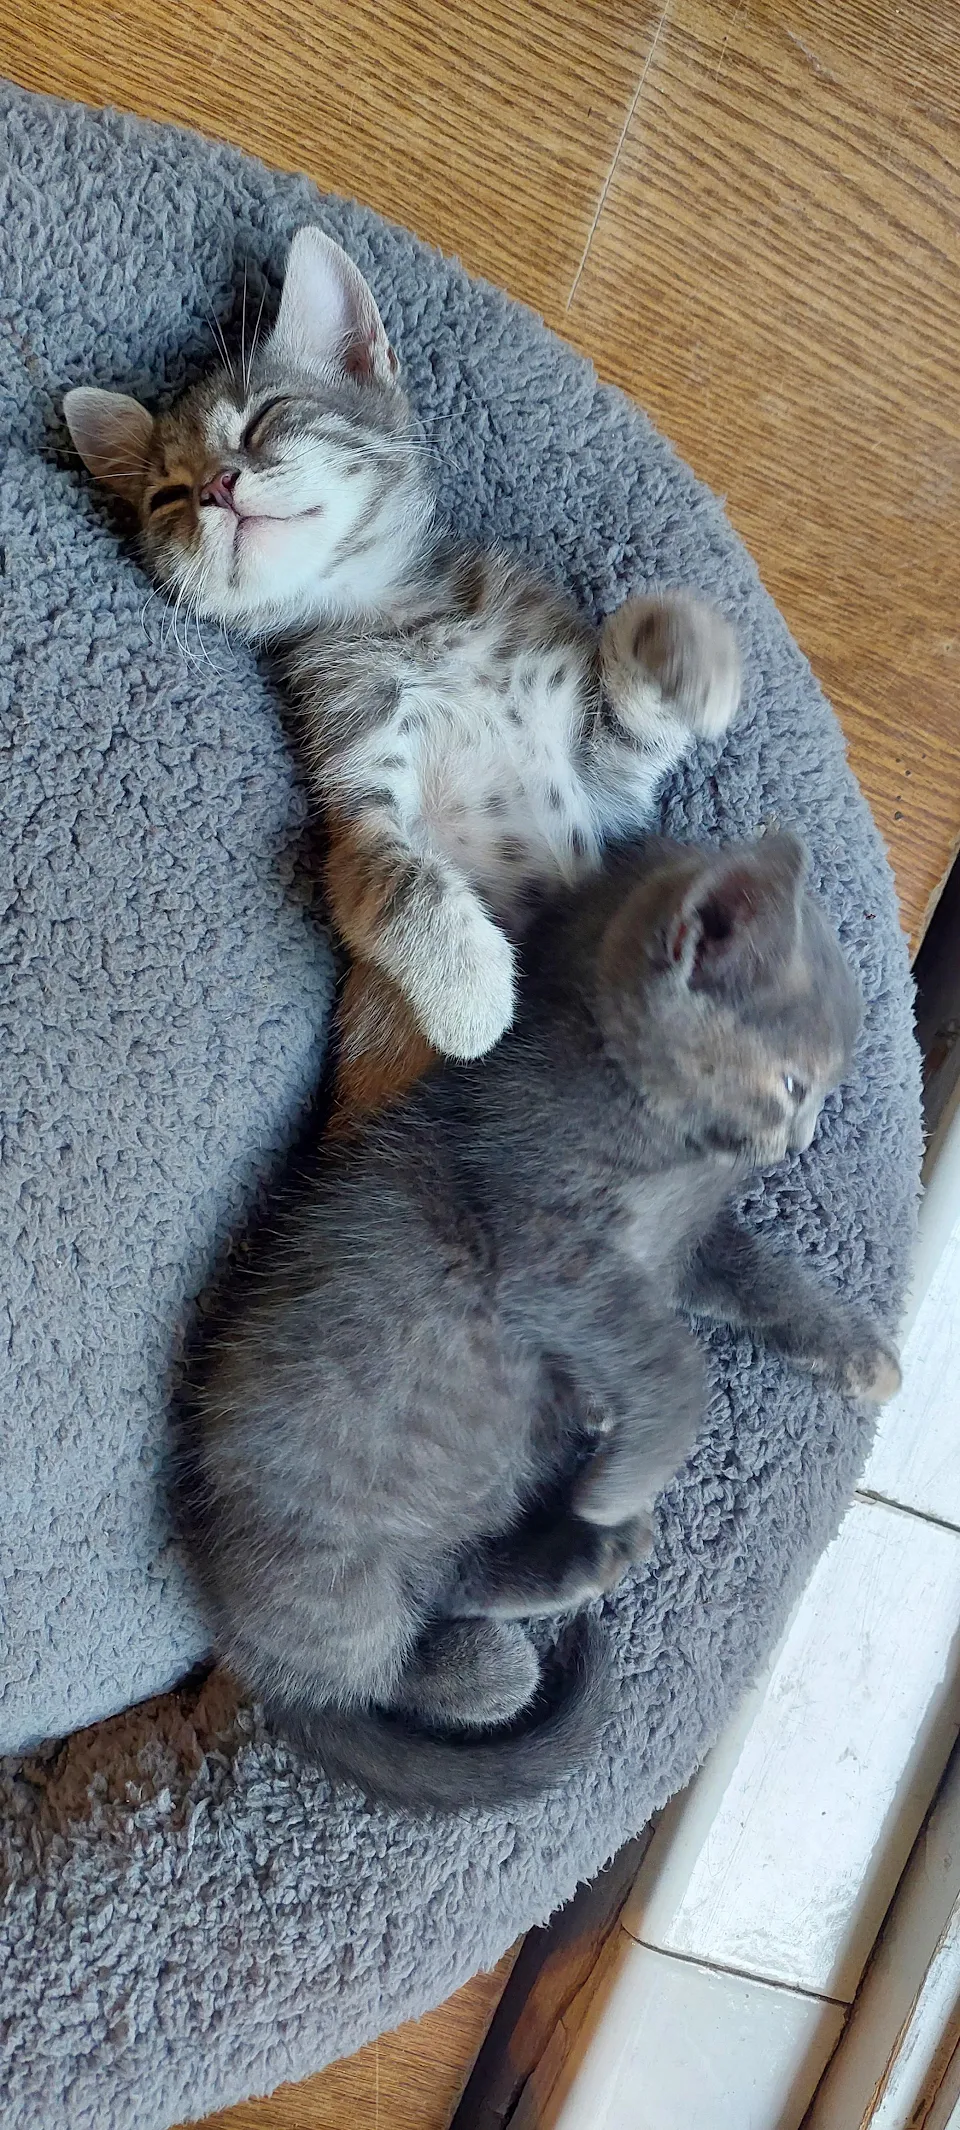 Two cuties napping